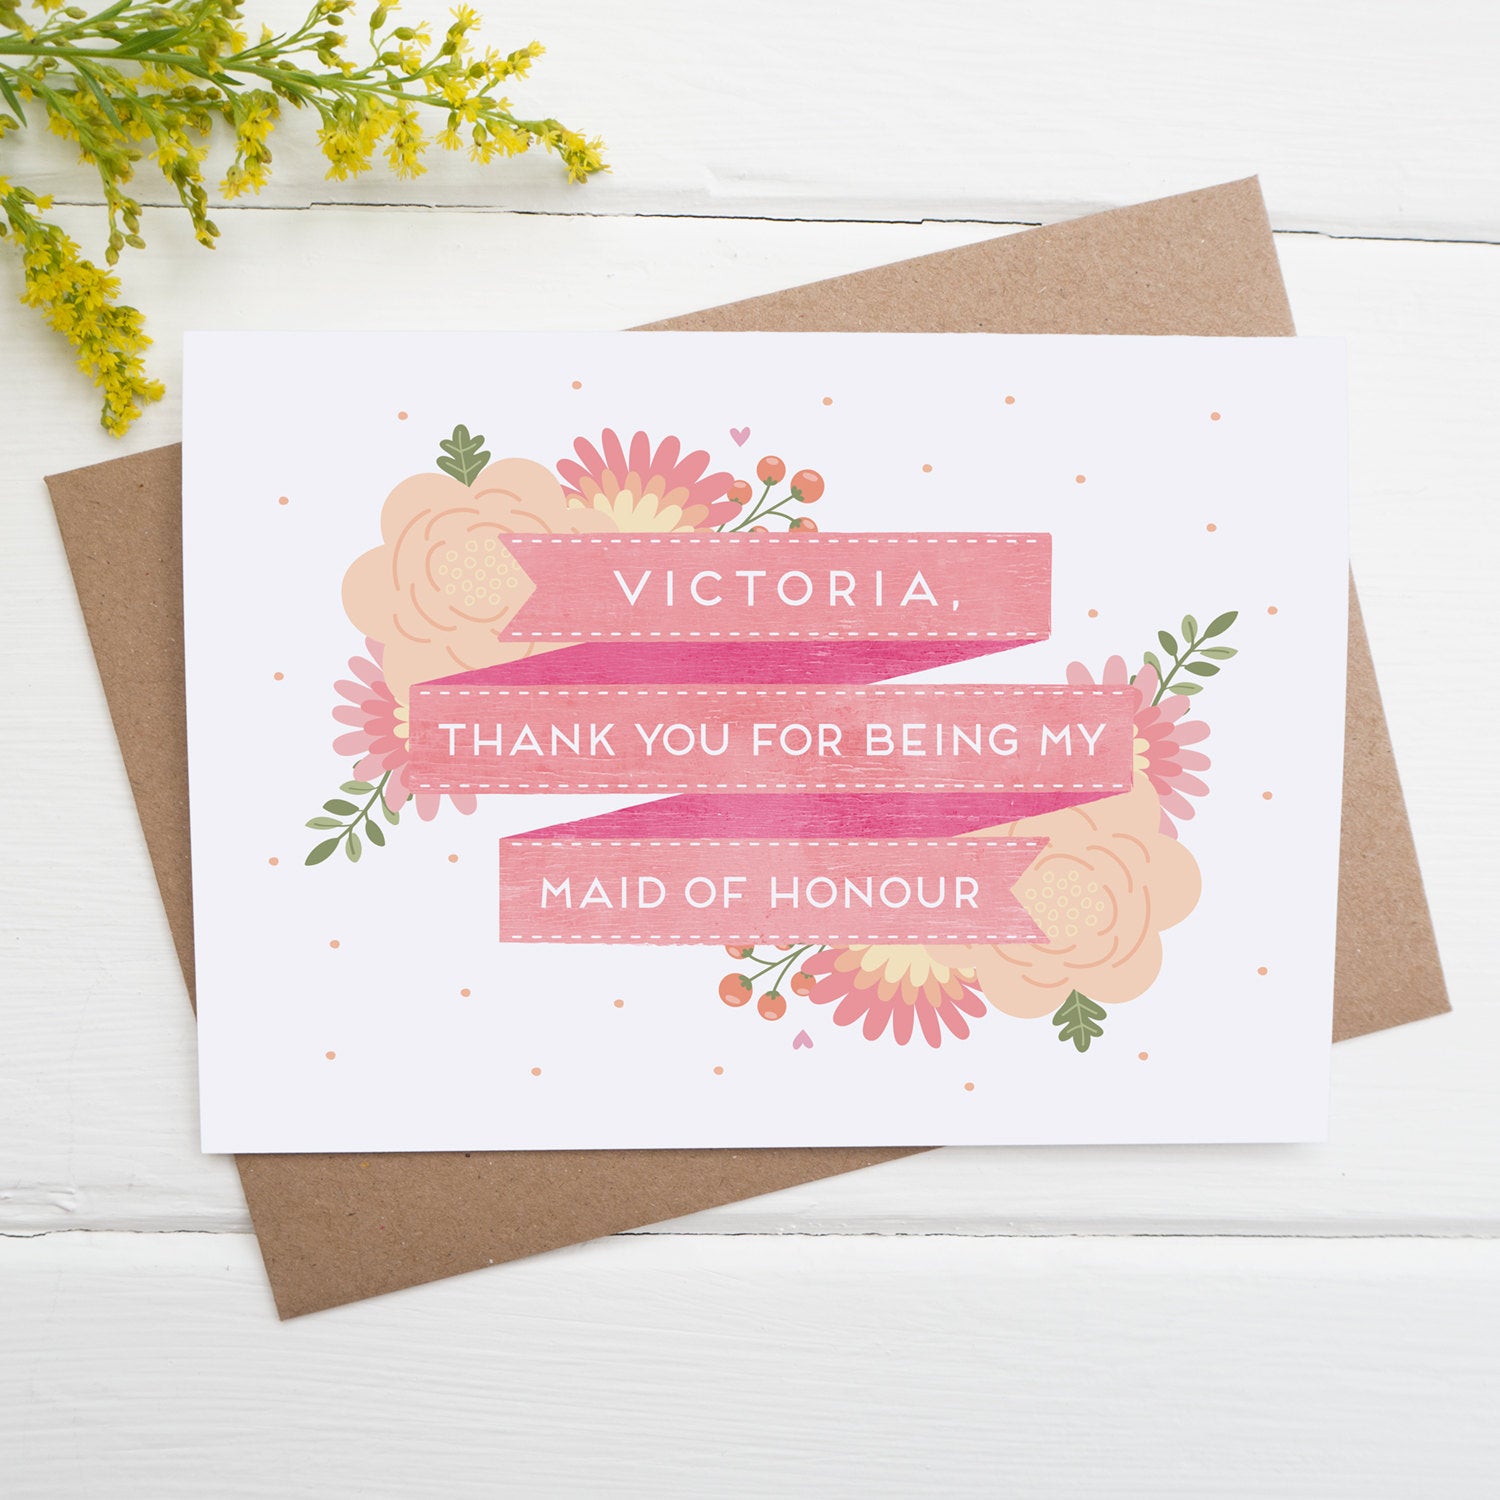 Personalised thank you for being my maid of honour card in pink